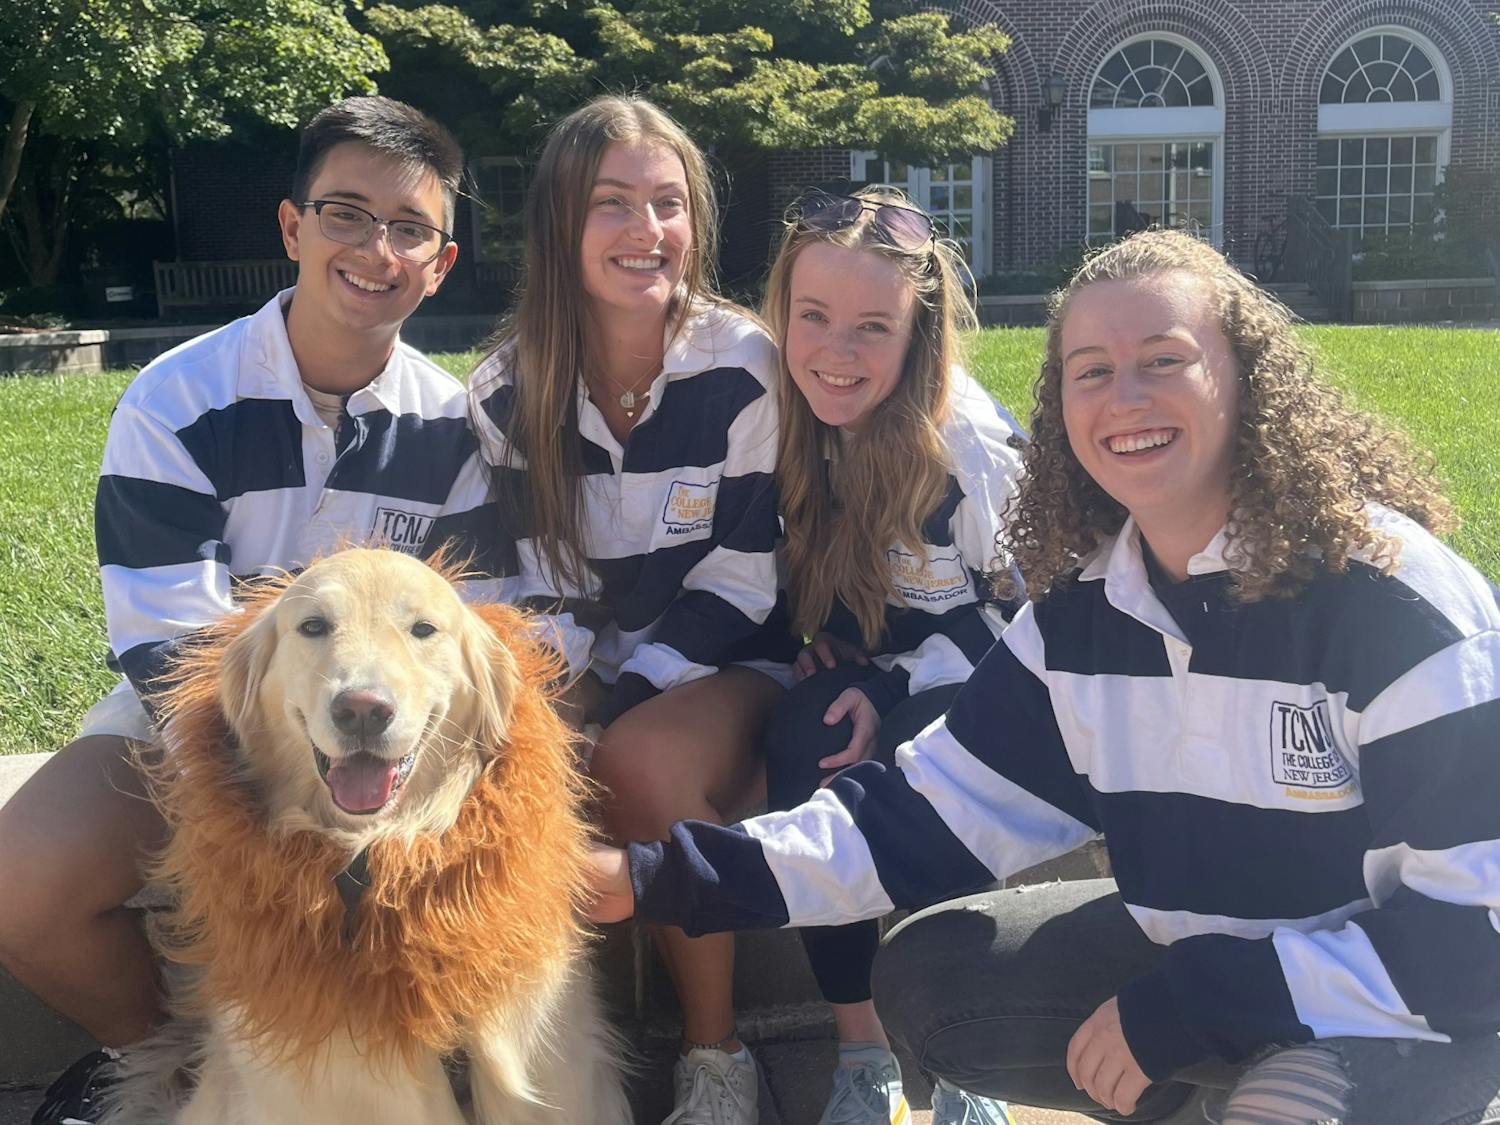 Ambassadors in particular are a very cooperative position that keeps students in touch with the exciting parts of campus life (Photo courtesy of Chelsea Berwick).